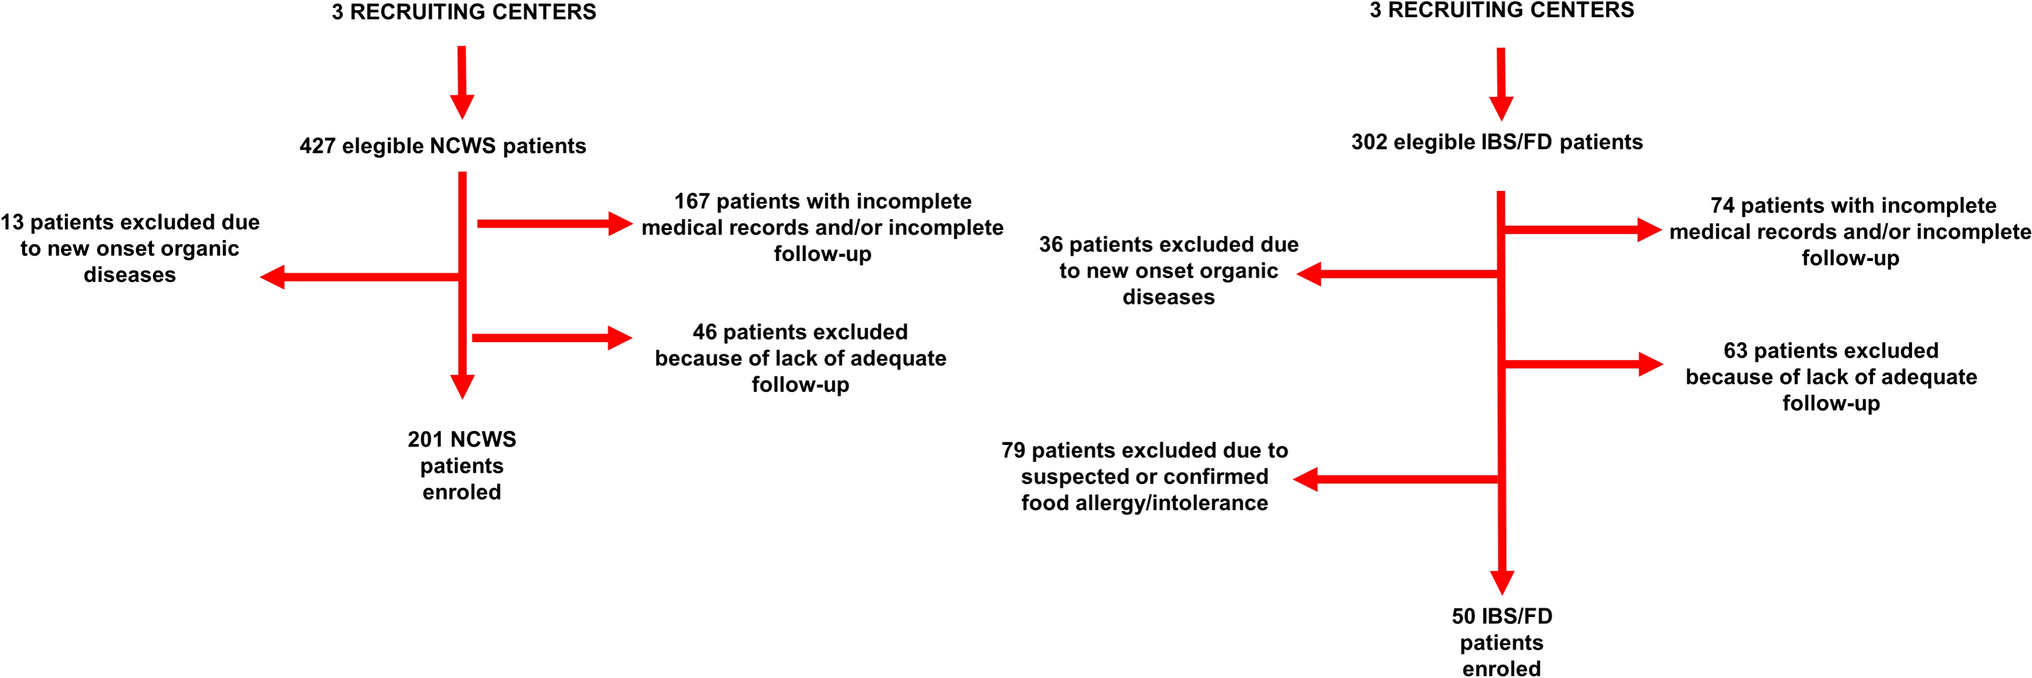 Fecal calprotectin levels in patients with non-celiac wheat sensitivity: a proof of concept